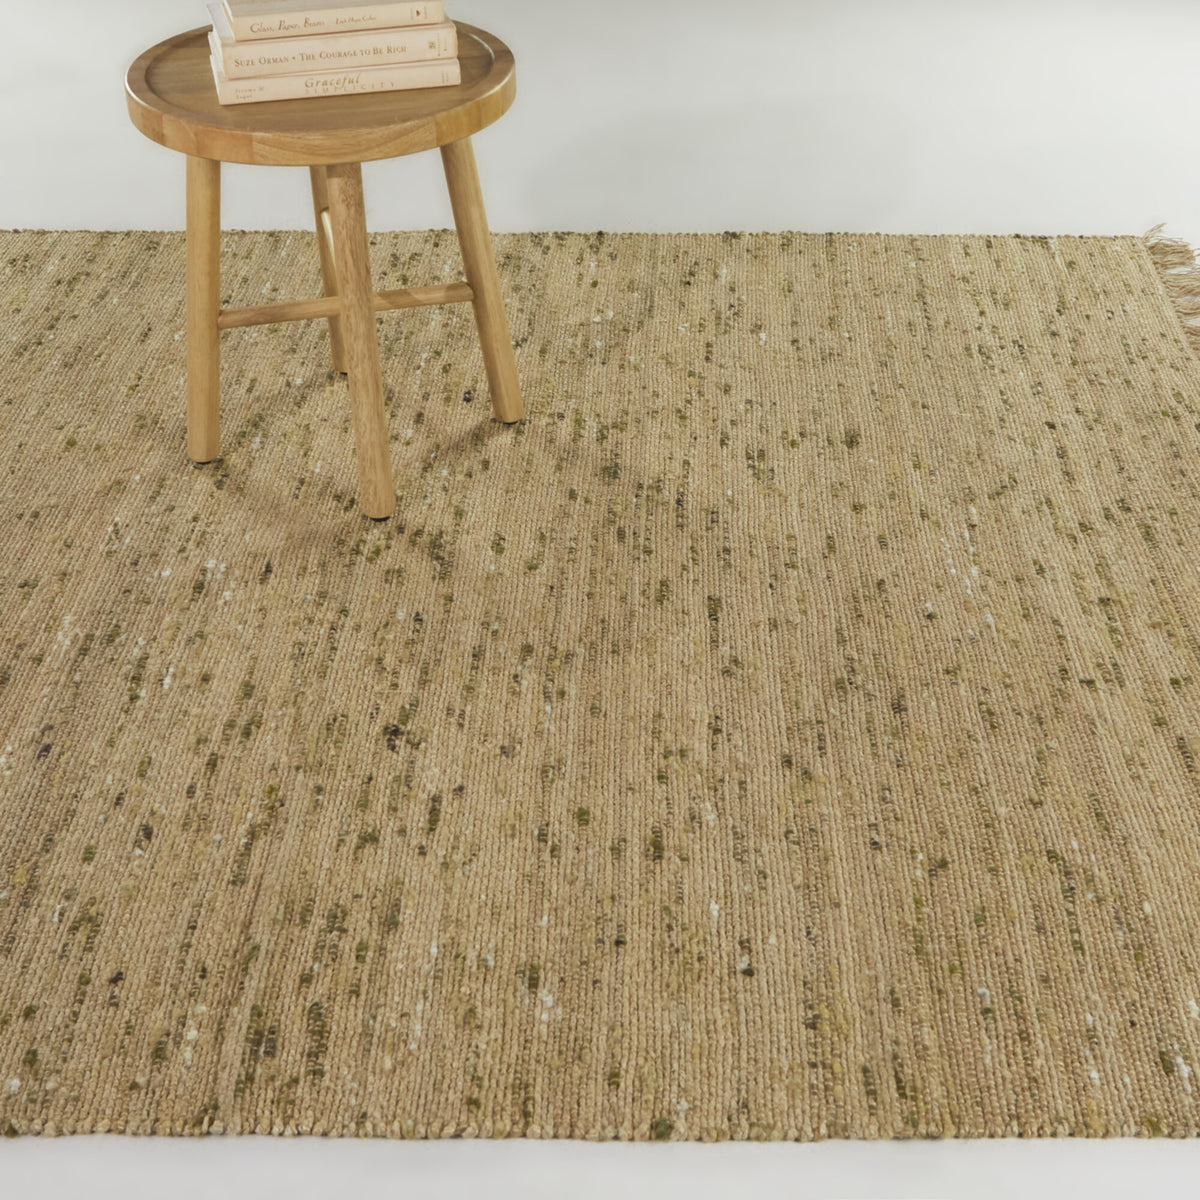 Deahl Textured Woven Area Rug